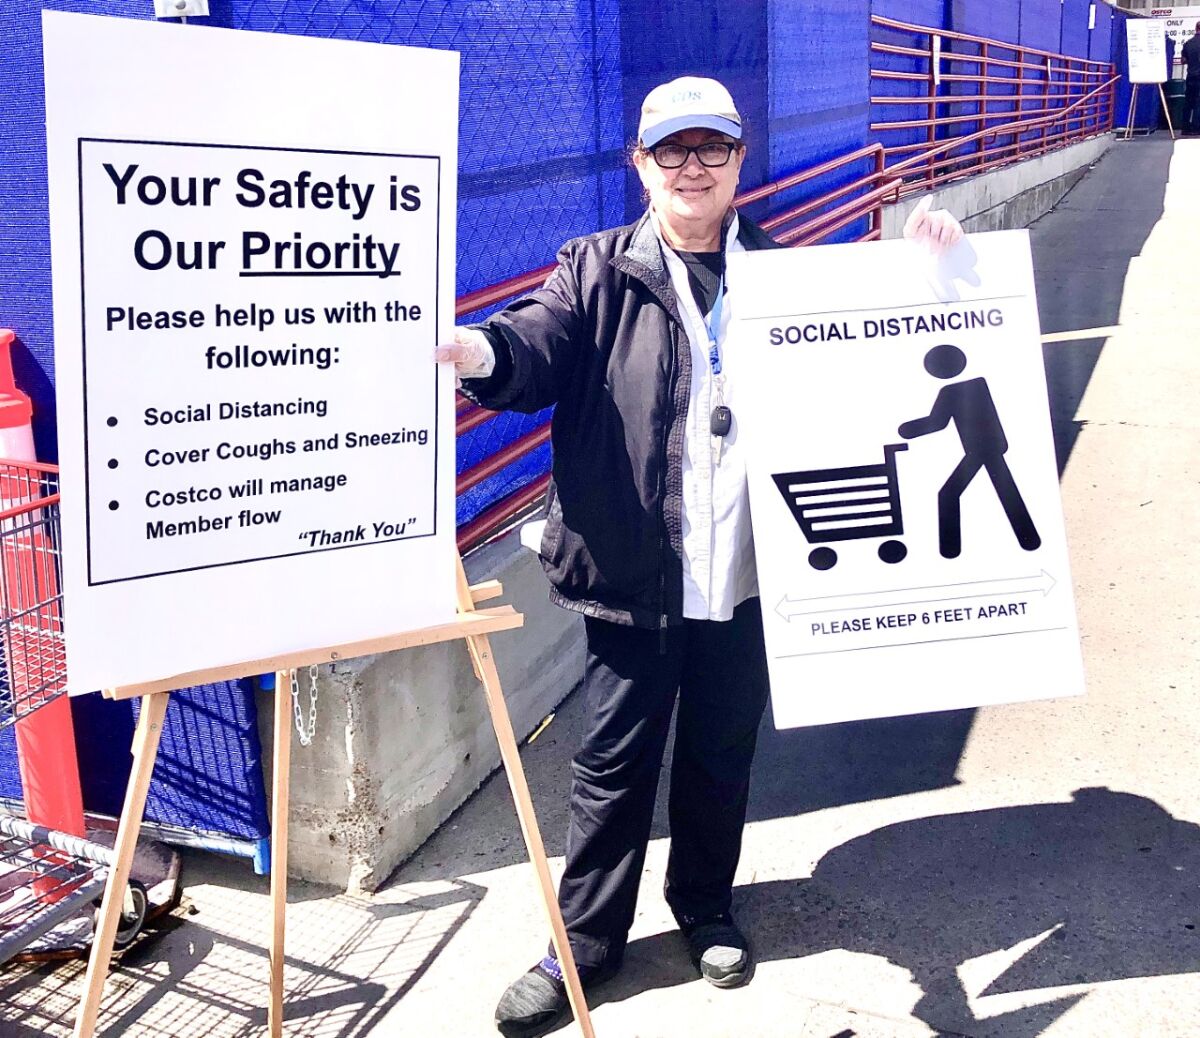 A new look at the entrance to the Costco on Morena Boulevard this week as its employees enforce social distancing directives to customers.